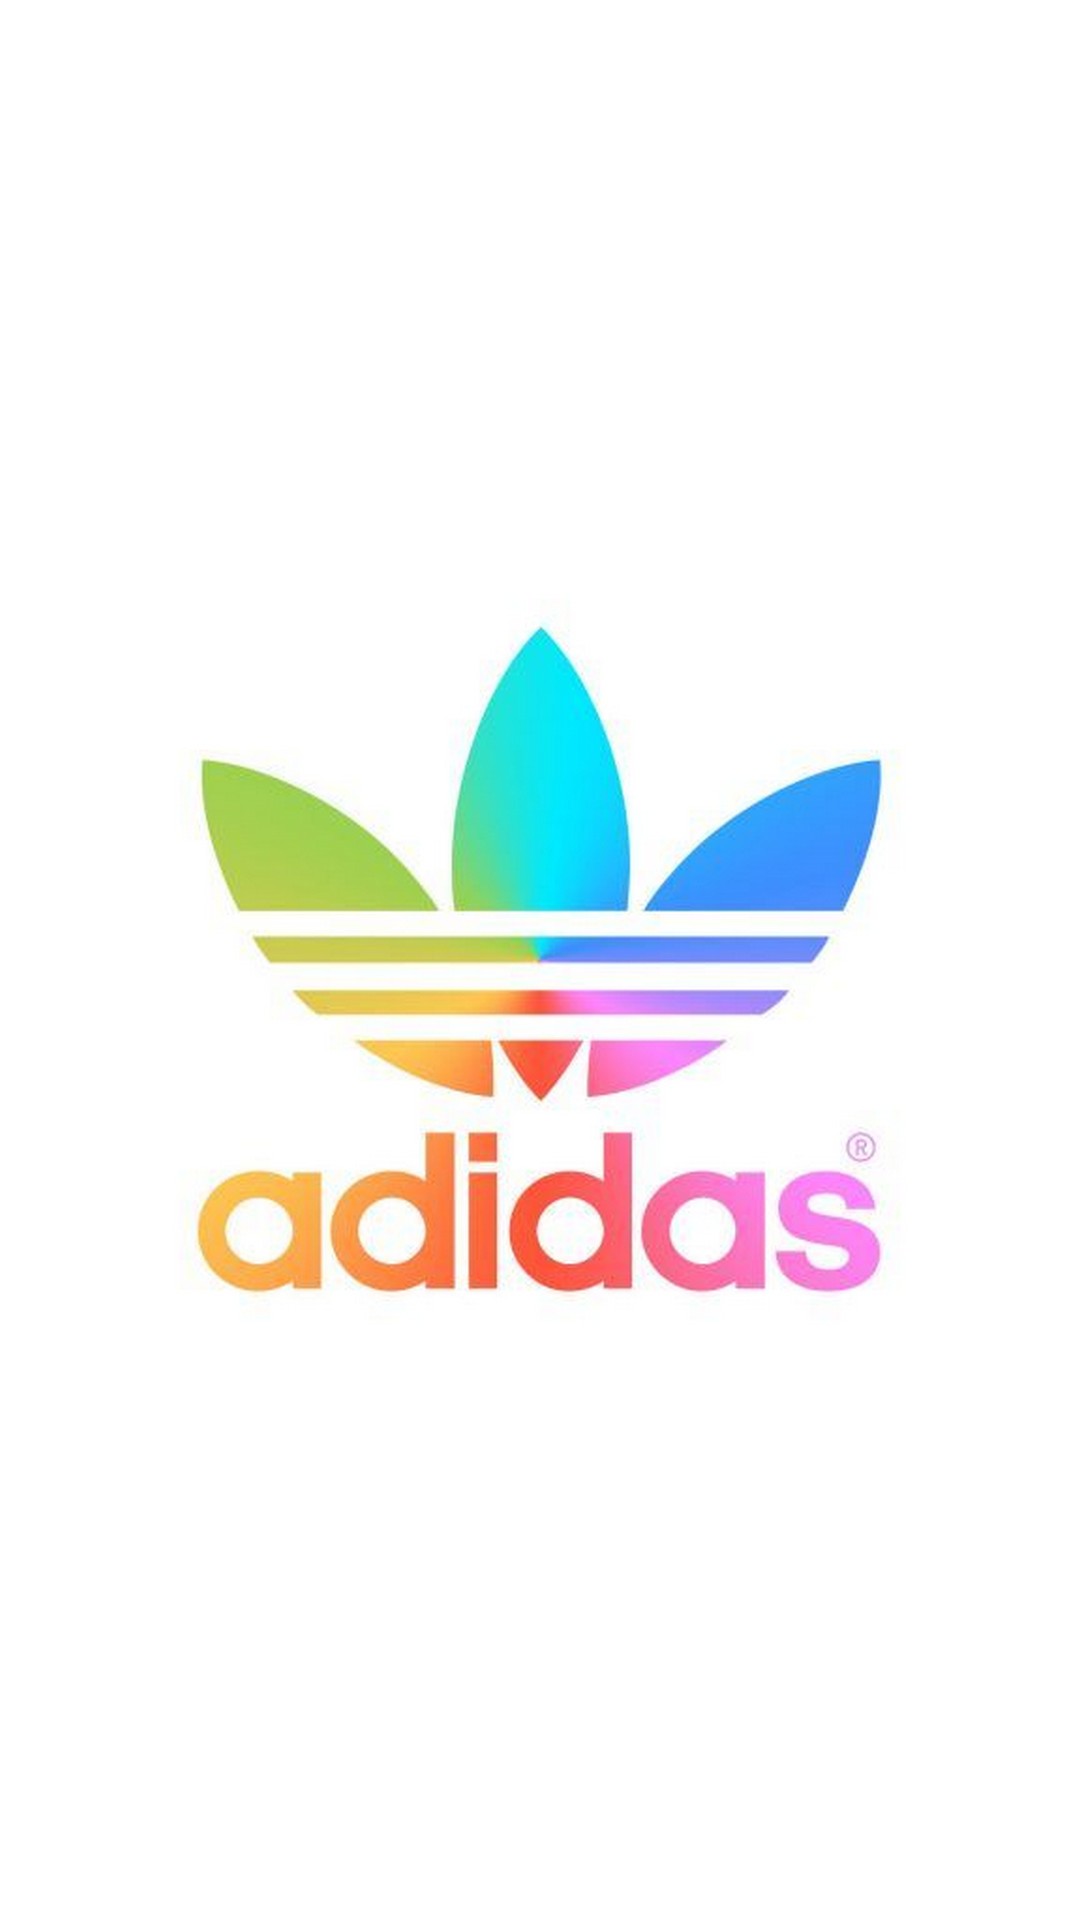 Android Wallpaper HD Adidas with high-resolution 1080x1920 pixel. You can use this wallpaper for your Android backgrounds, Tablet, Samsung Screensavers, Mobile Phone Lock Screen and another Smartphones device